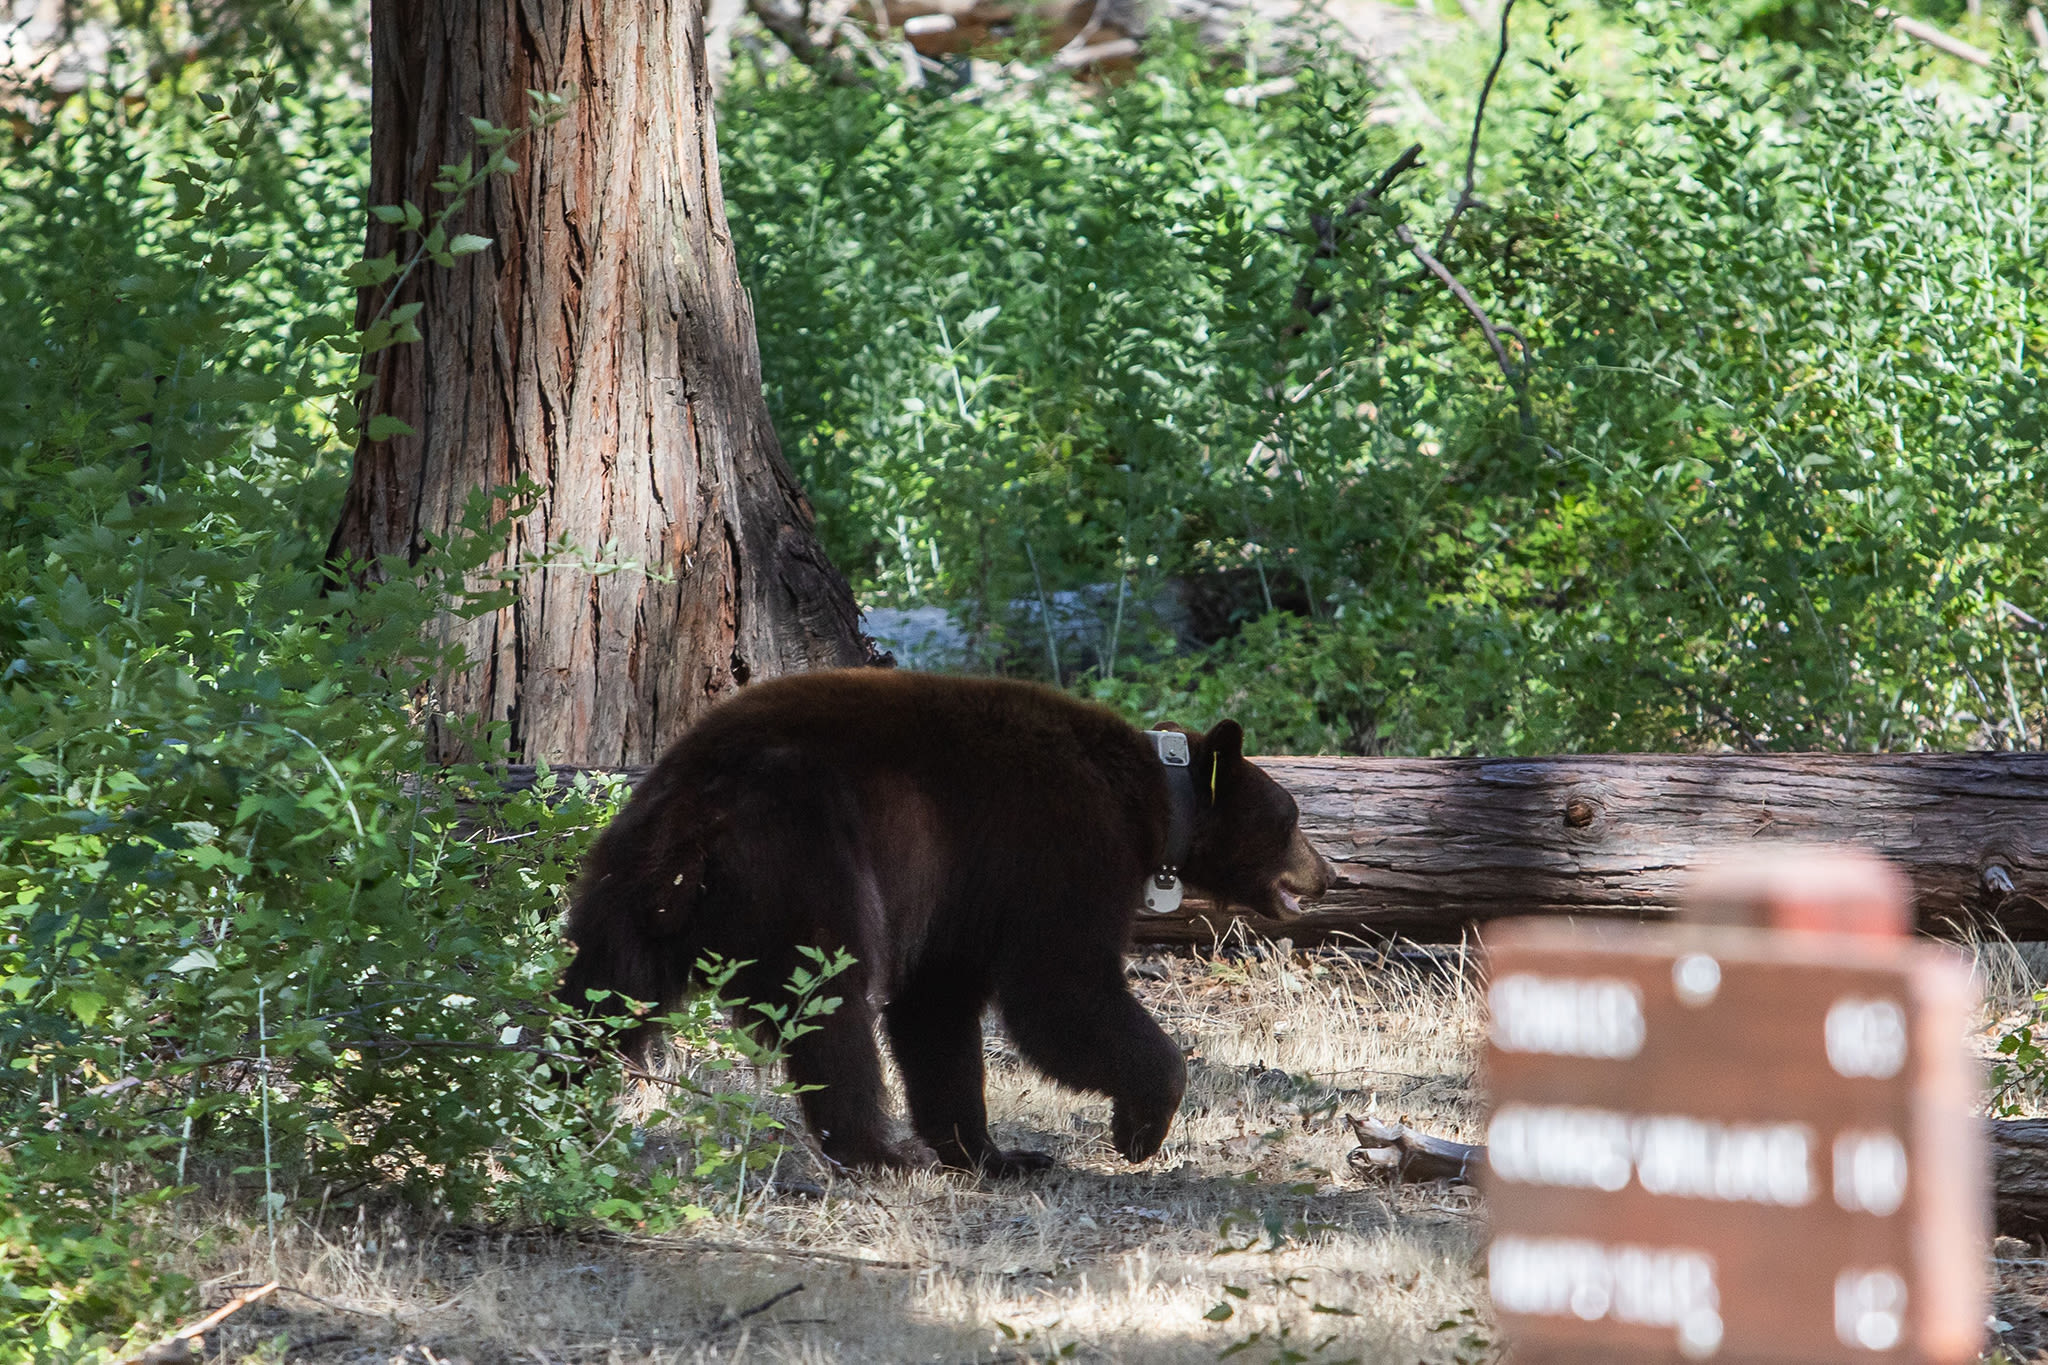 Trash-eating bear reportedly charges visitor in Yosemite